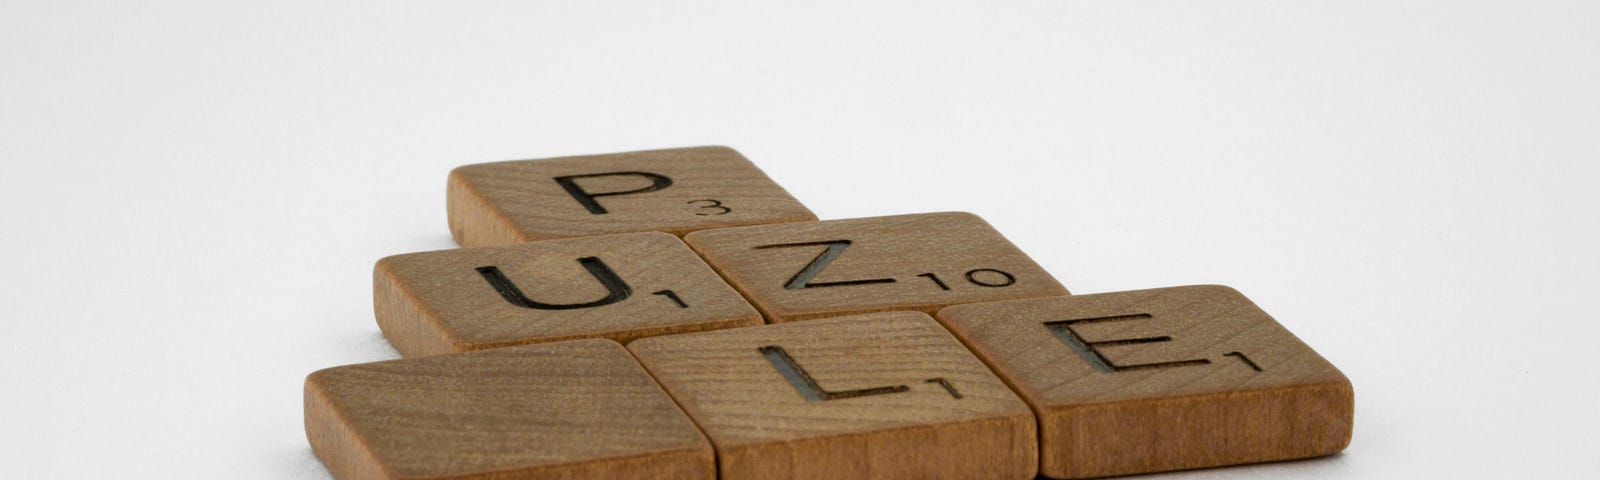 Scrabble tiles are arranged into a flat pyramid, spelling “puzzle” without the second “z.”